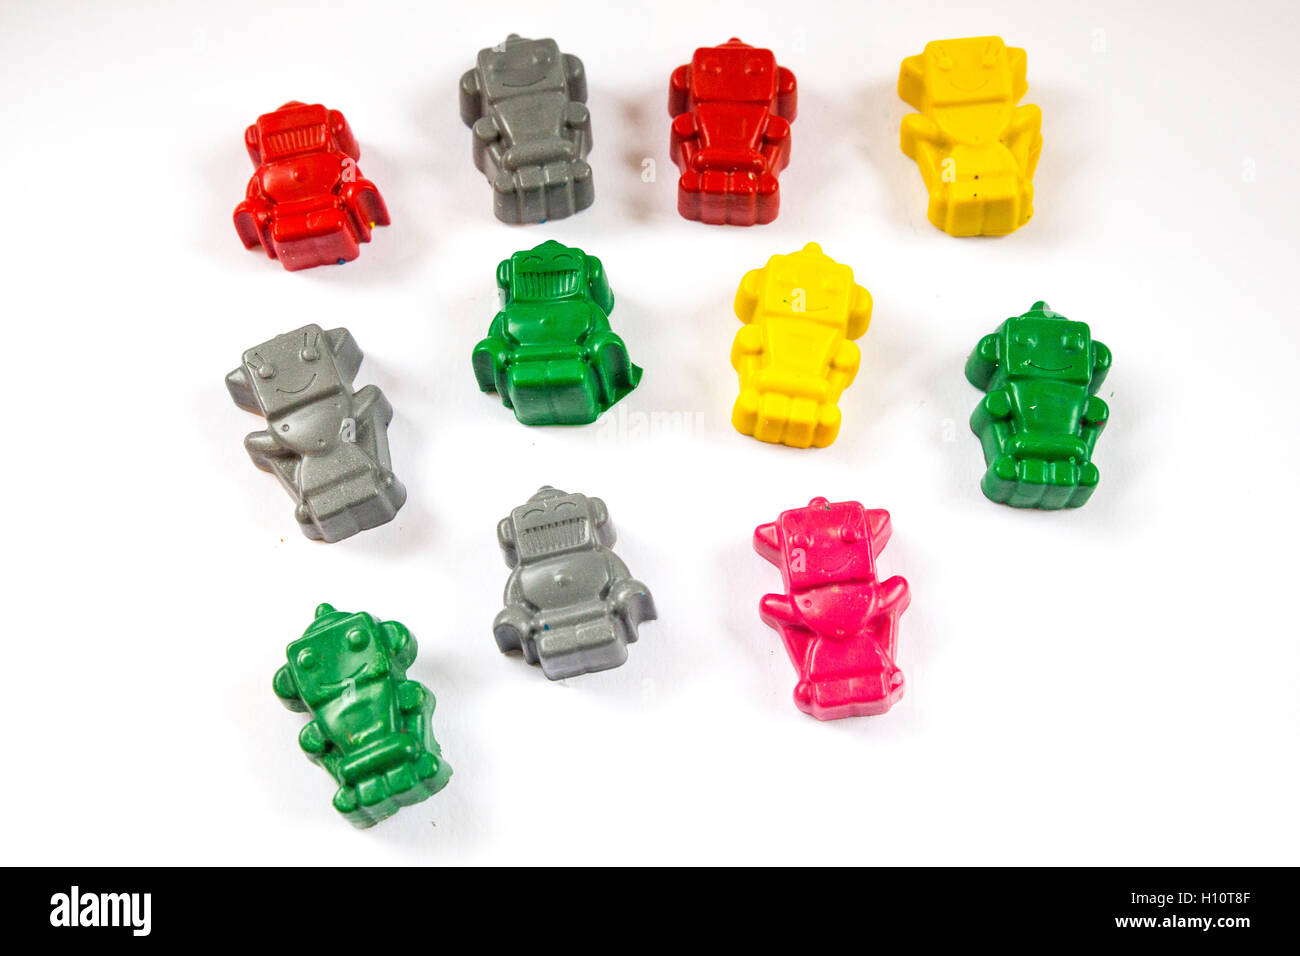 Colourful Robot crayons in unusual shapes. Stock Photo